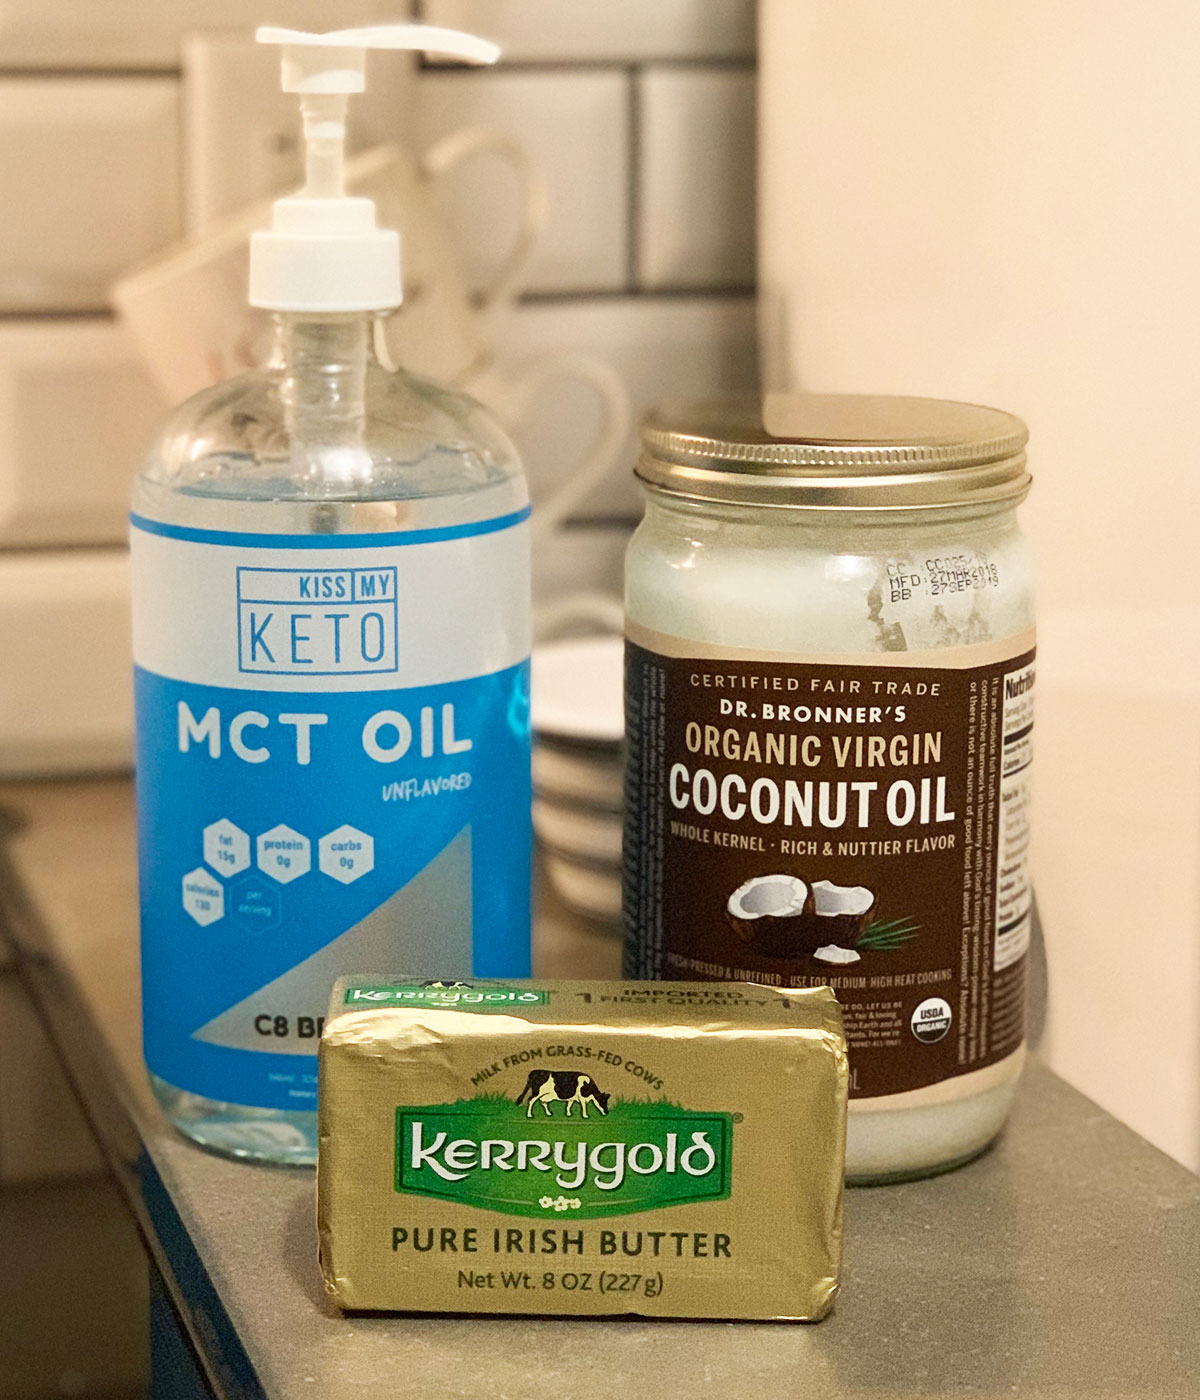 MCT oil and coconut oil, alongside Kerrygold butter